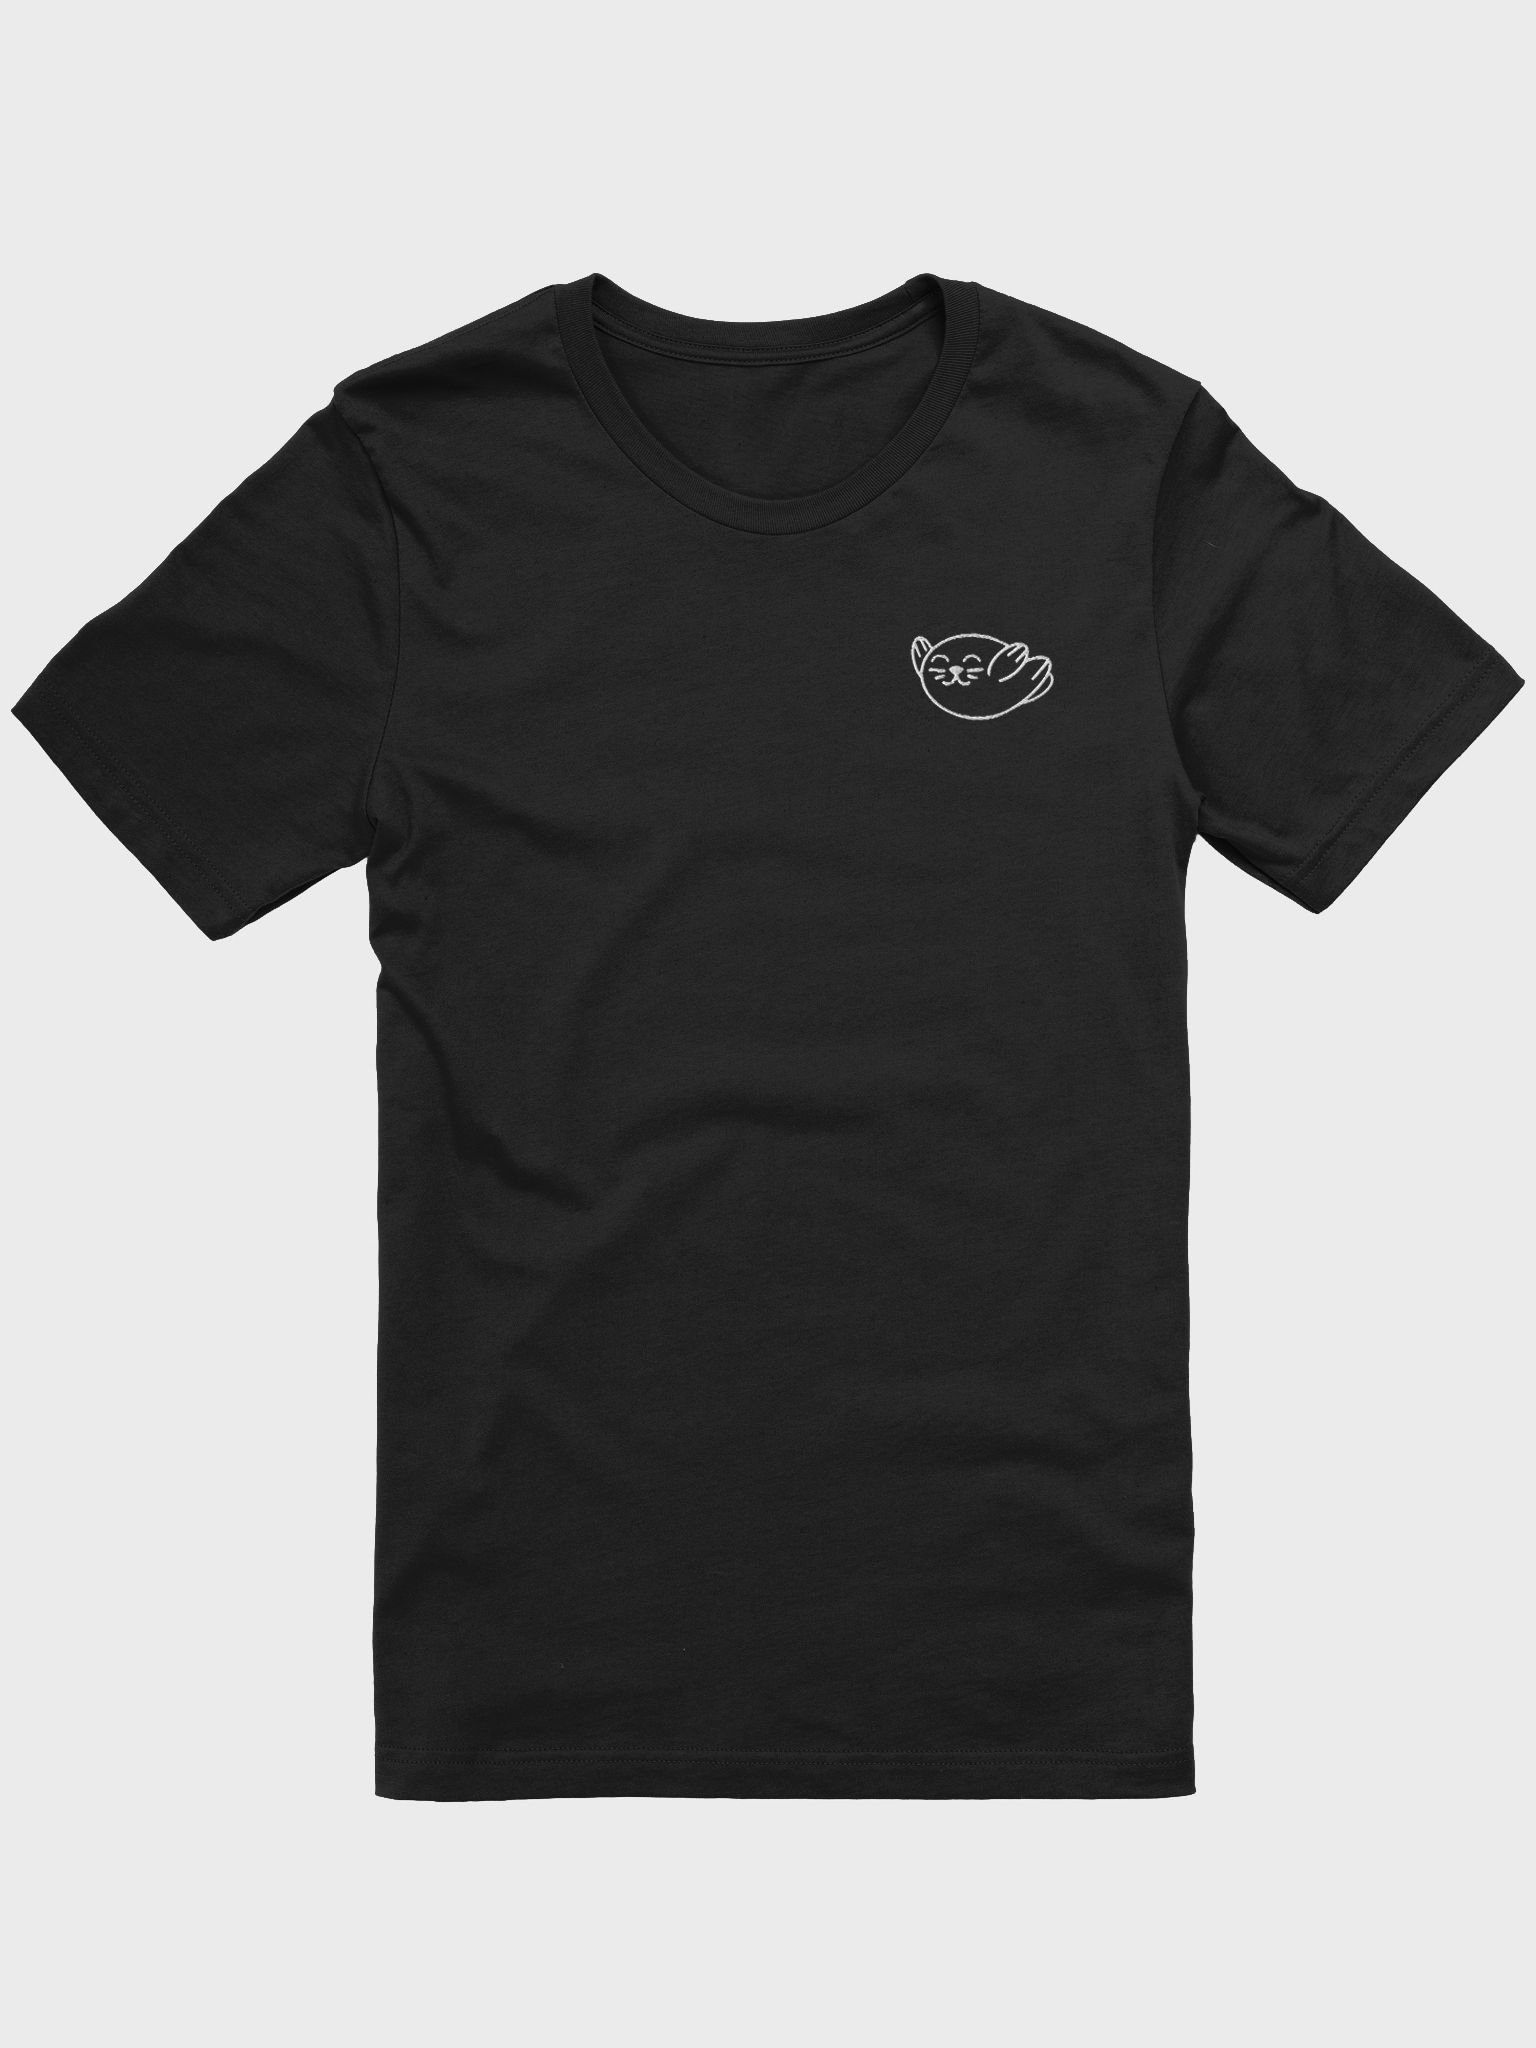 Seal Embroidered T-Shirt | Odablock